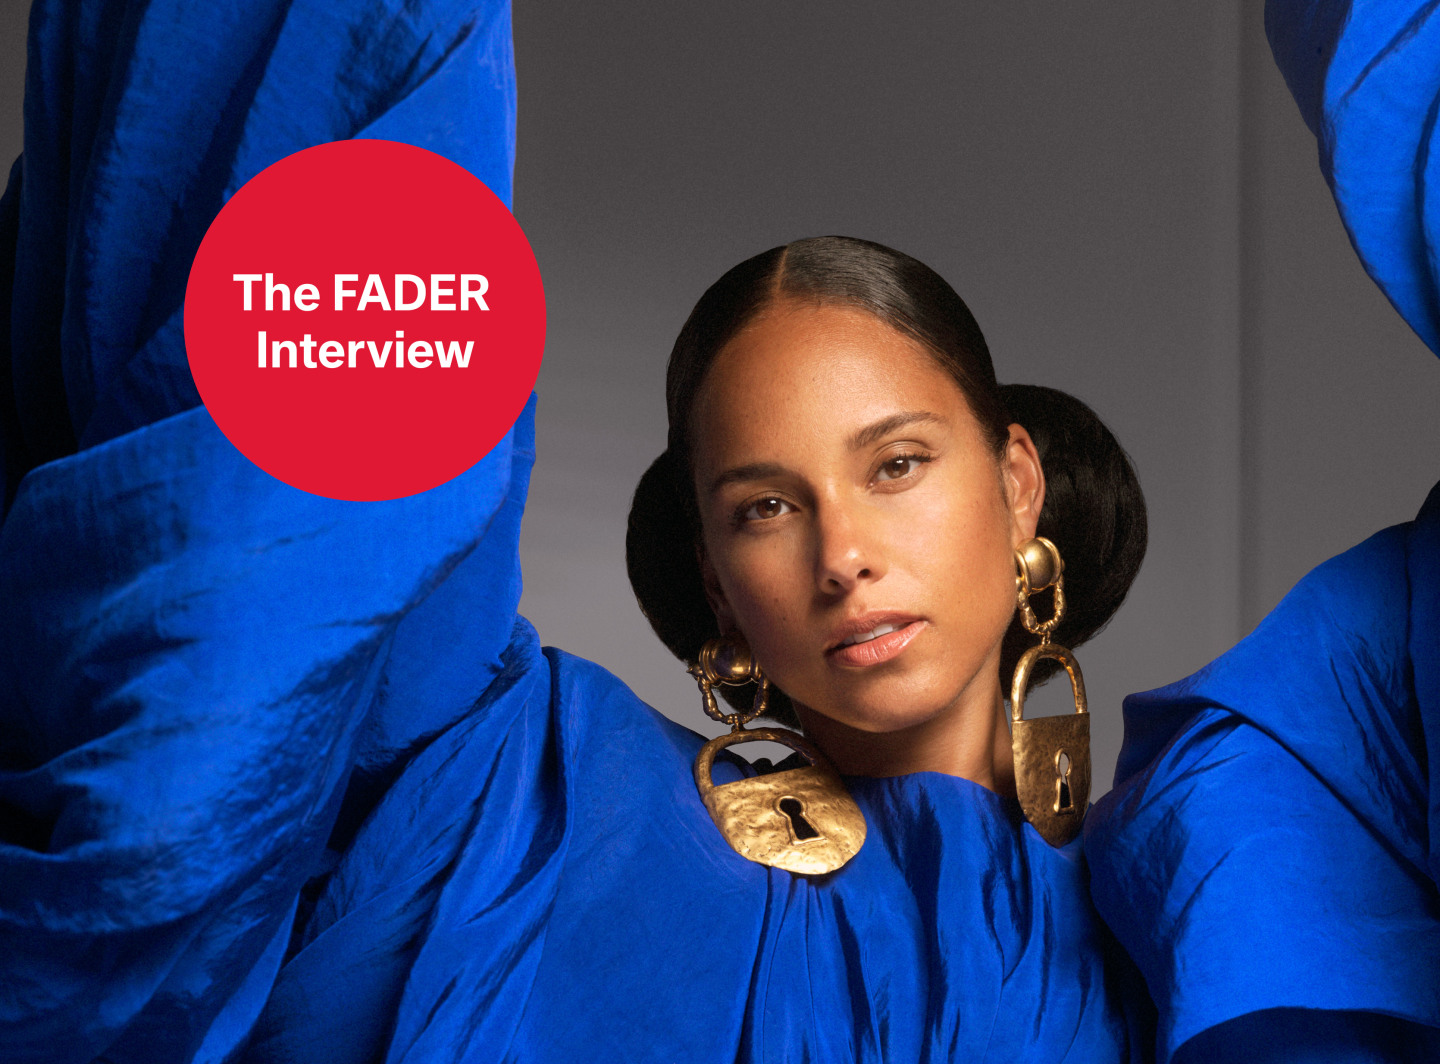 Alicia Keys on creative breakthroughs and the meaning of home